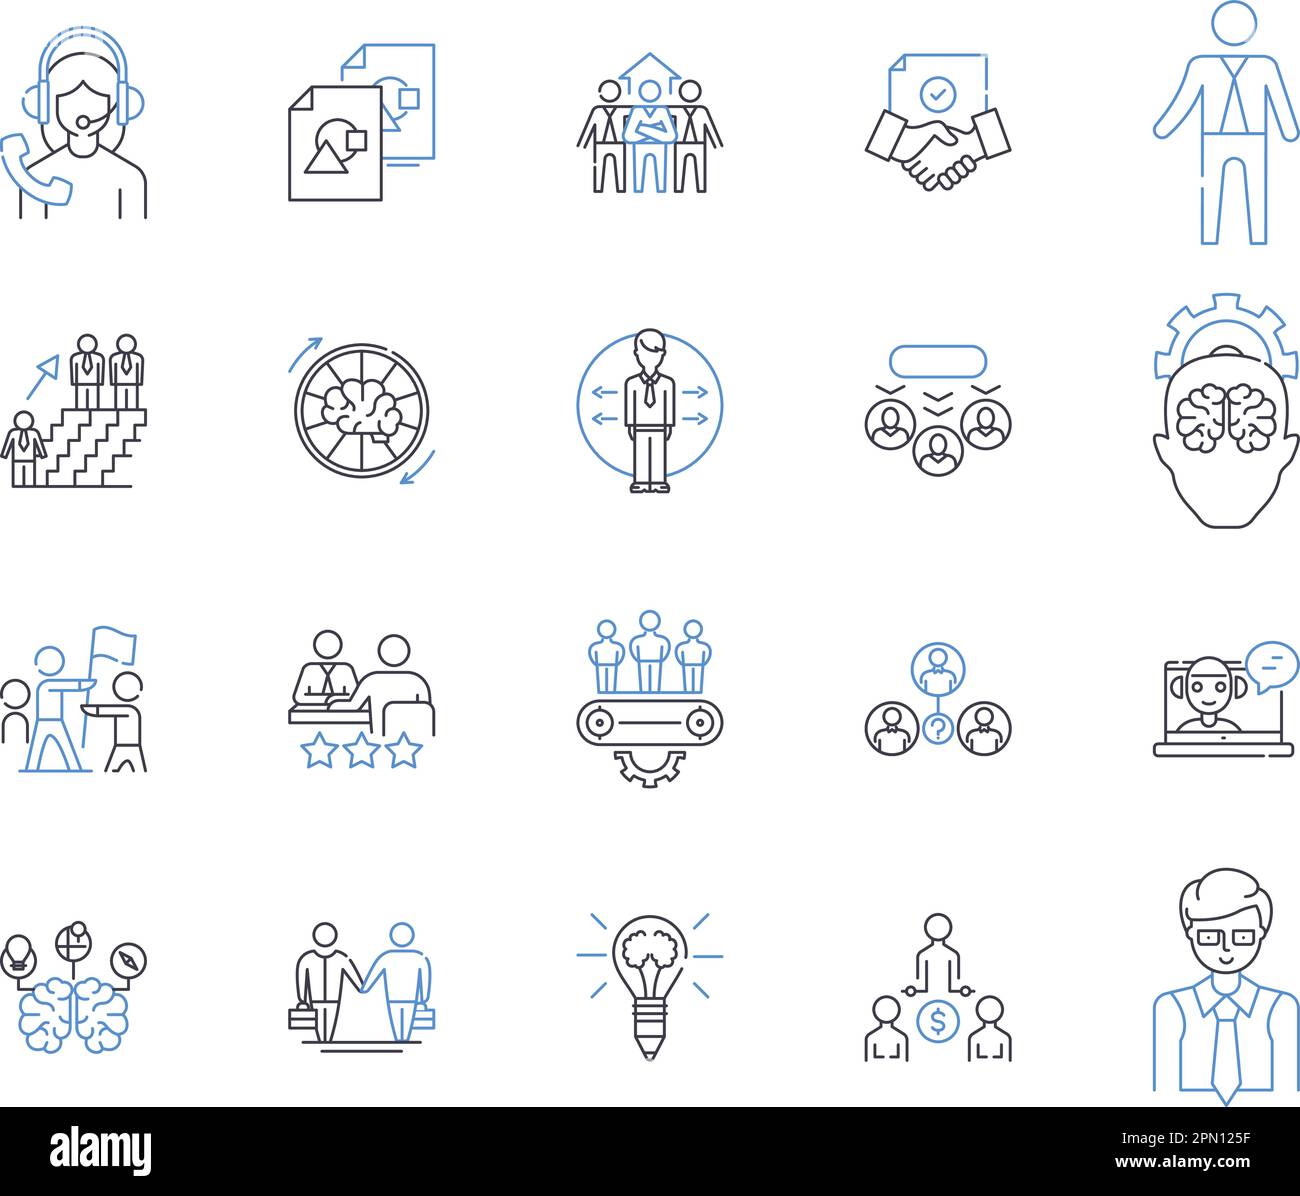 Chief Executive Officer outline icons collection. CEO, Chief, Executive, Officer, Manager, Leader, Director vector and illustration concept set. Chair Stock Vector